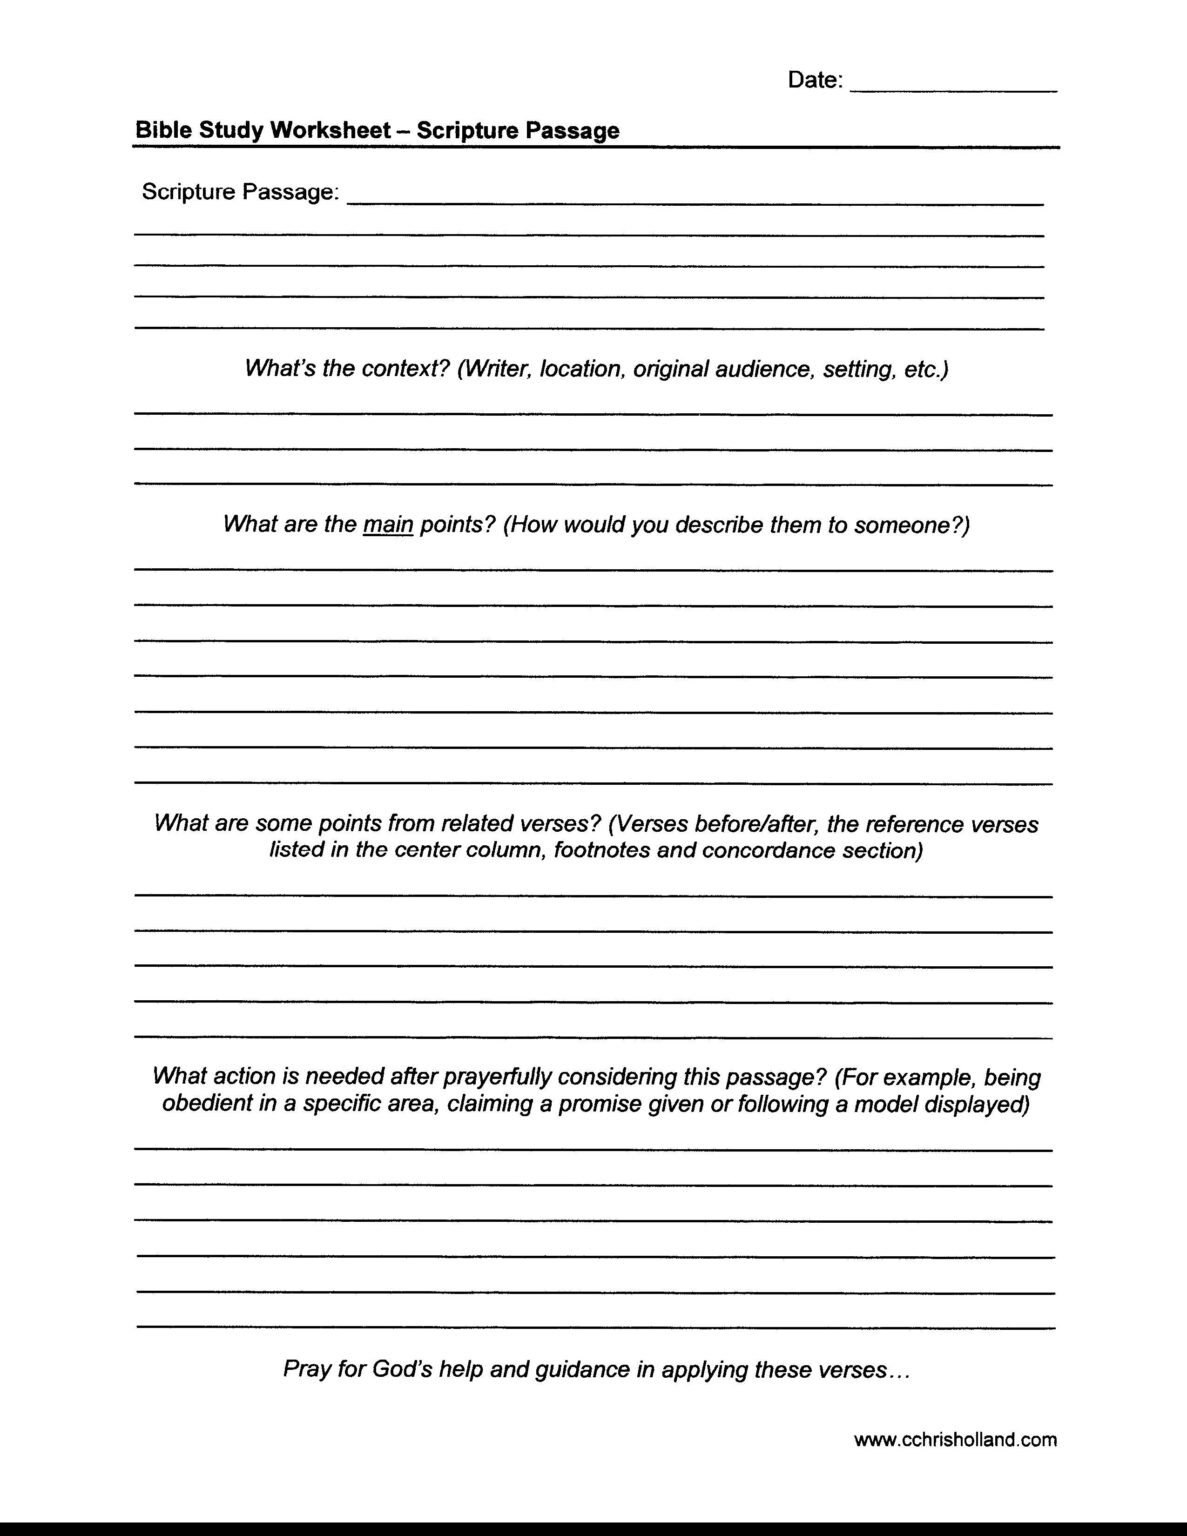 free-bible-study-lessons-for-adults-printable-pdf-printable-worksheets